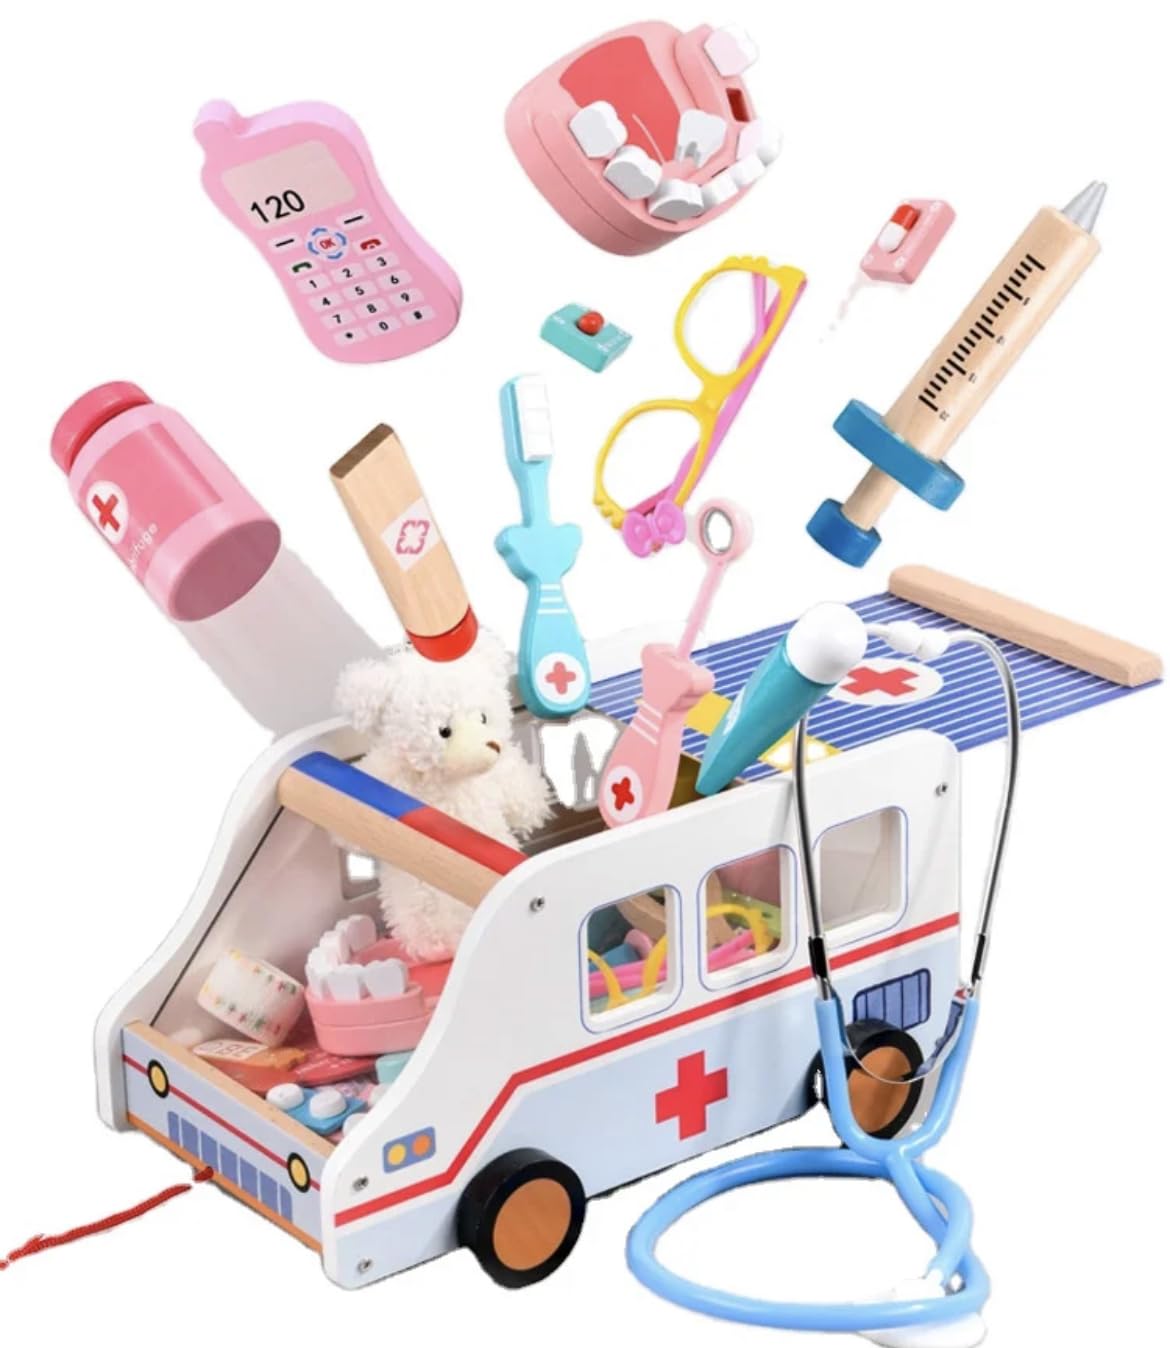 Doctor Role Play Set Wooden Ambulance Doctor Kit 37pcs Pretend Play Medical Kit with Plush Bear, Imagination Doctor Role Play Set